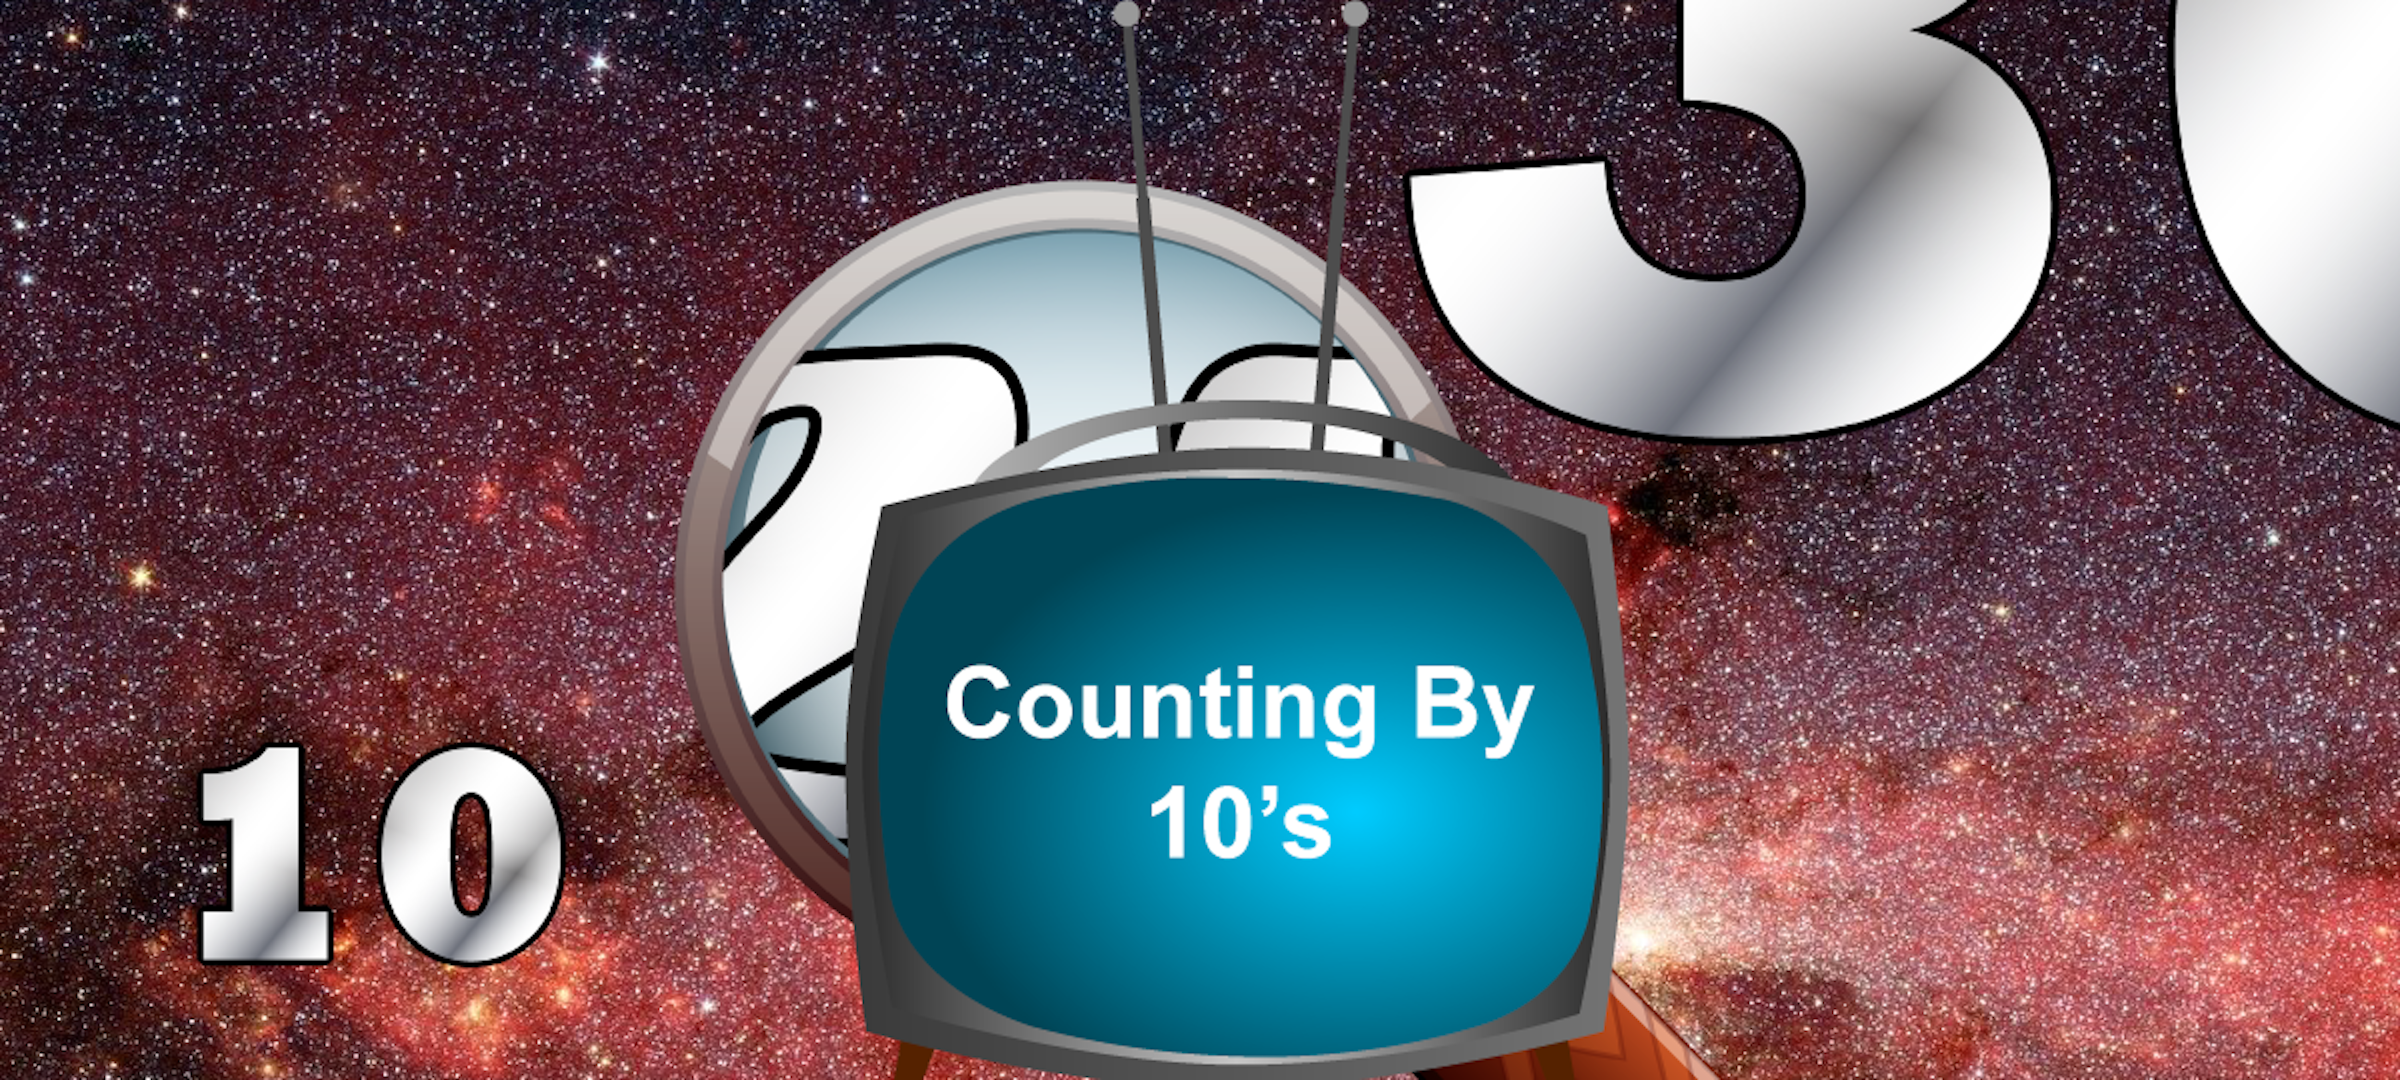 Video Tutorial: Place Value--Counting by 10's